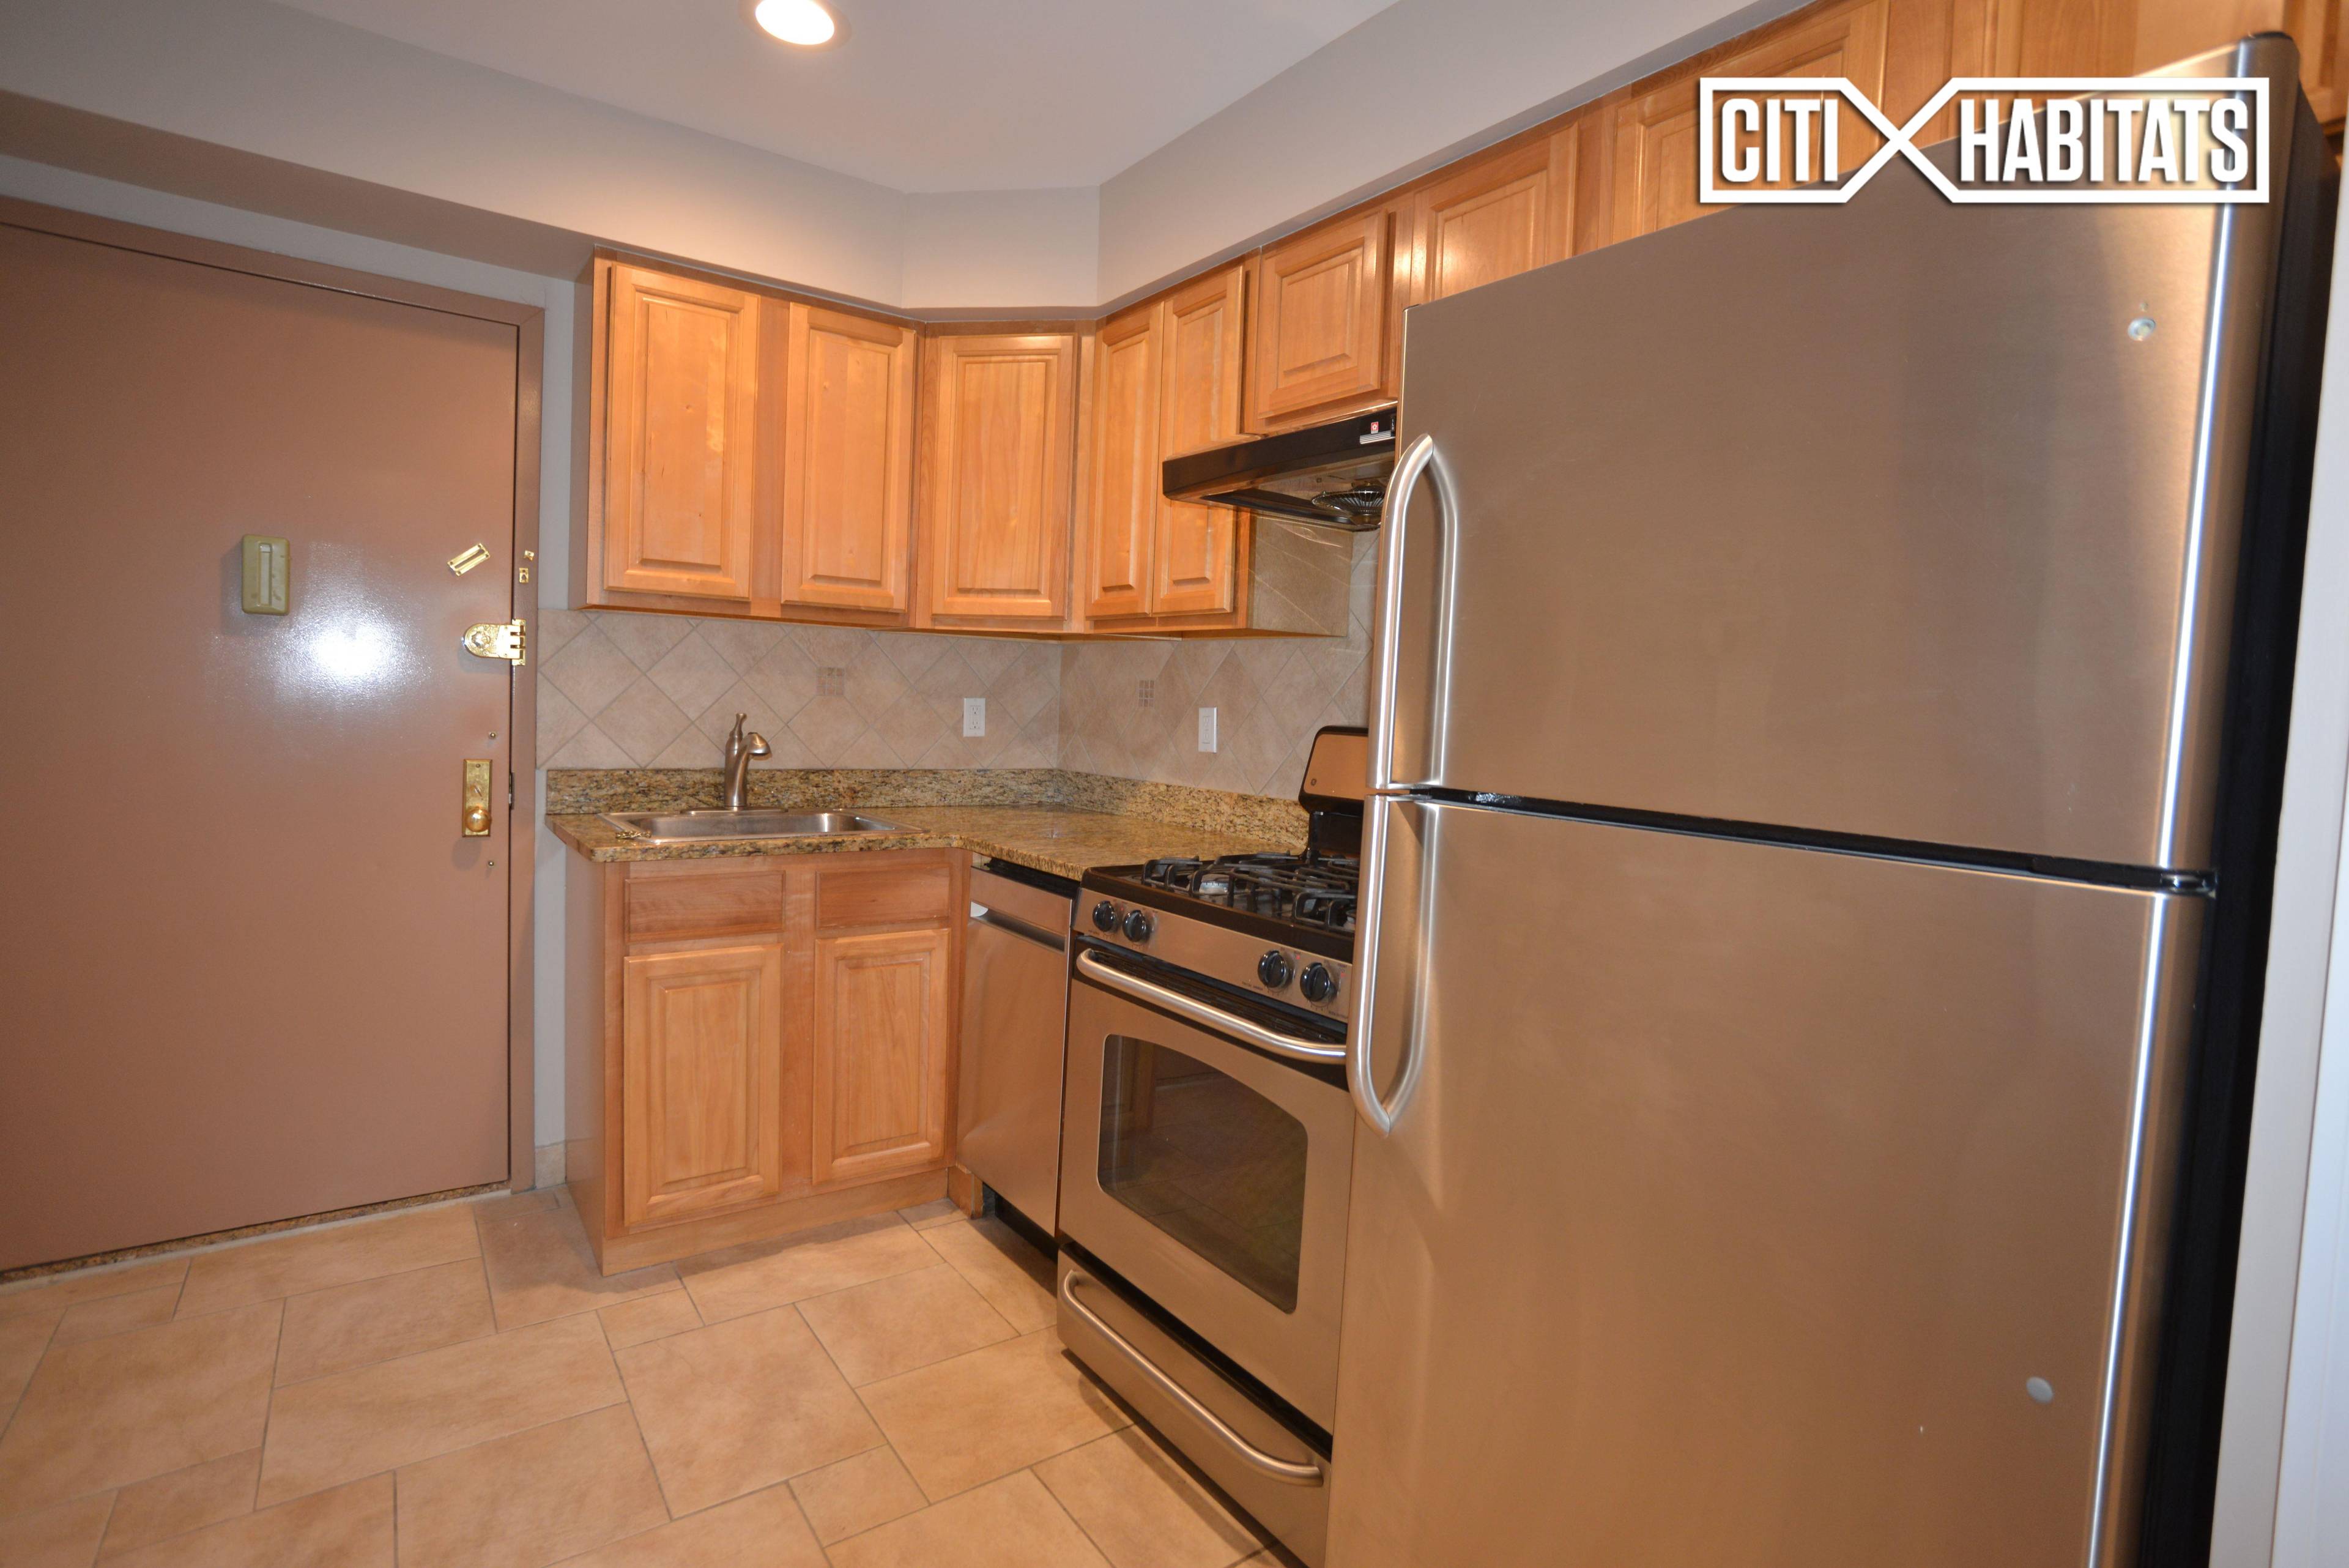 This charming 4 bed 2 full bath first floor apartment is located in the East Village.